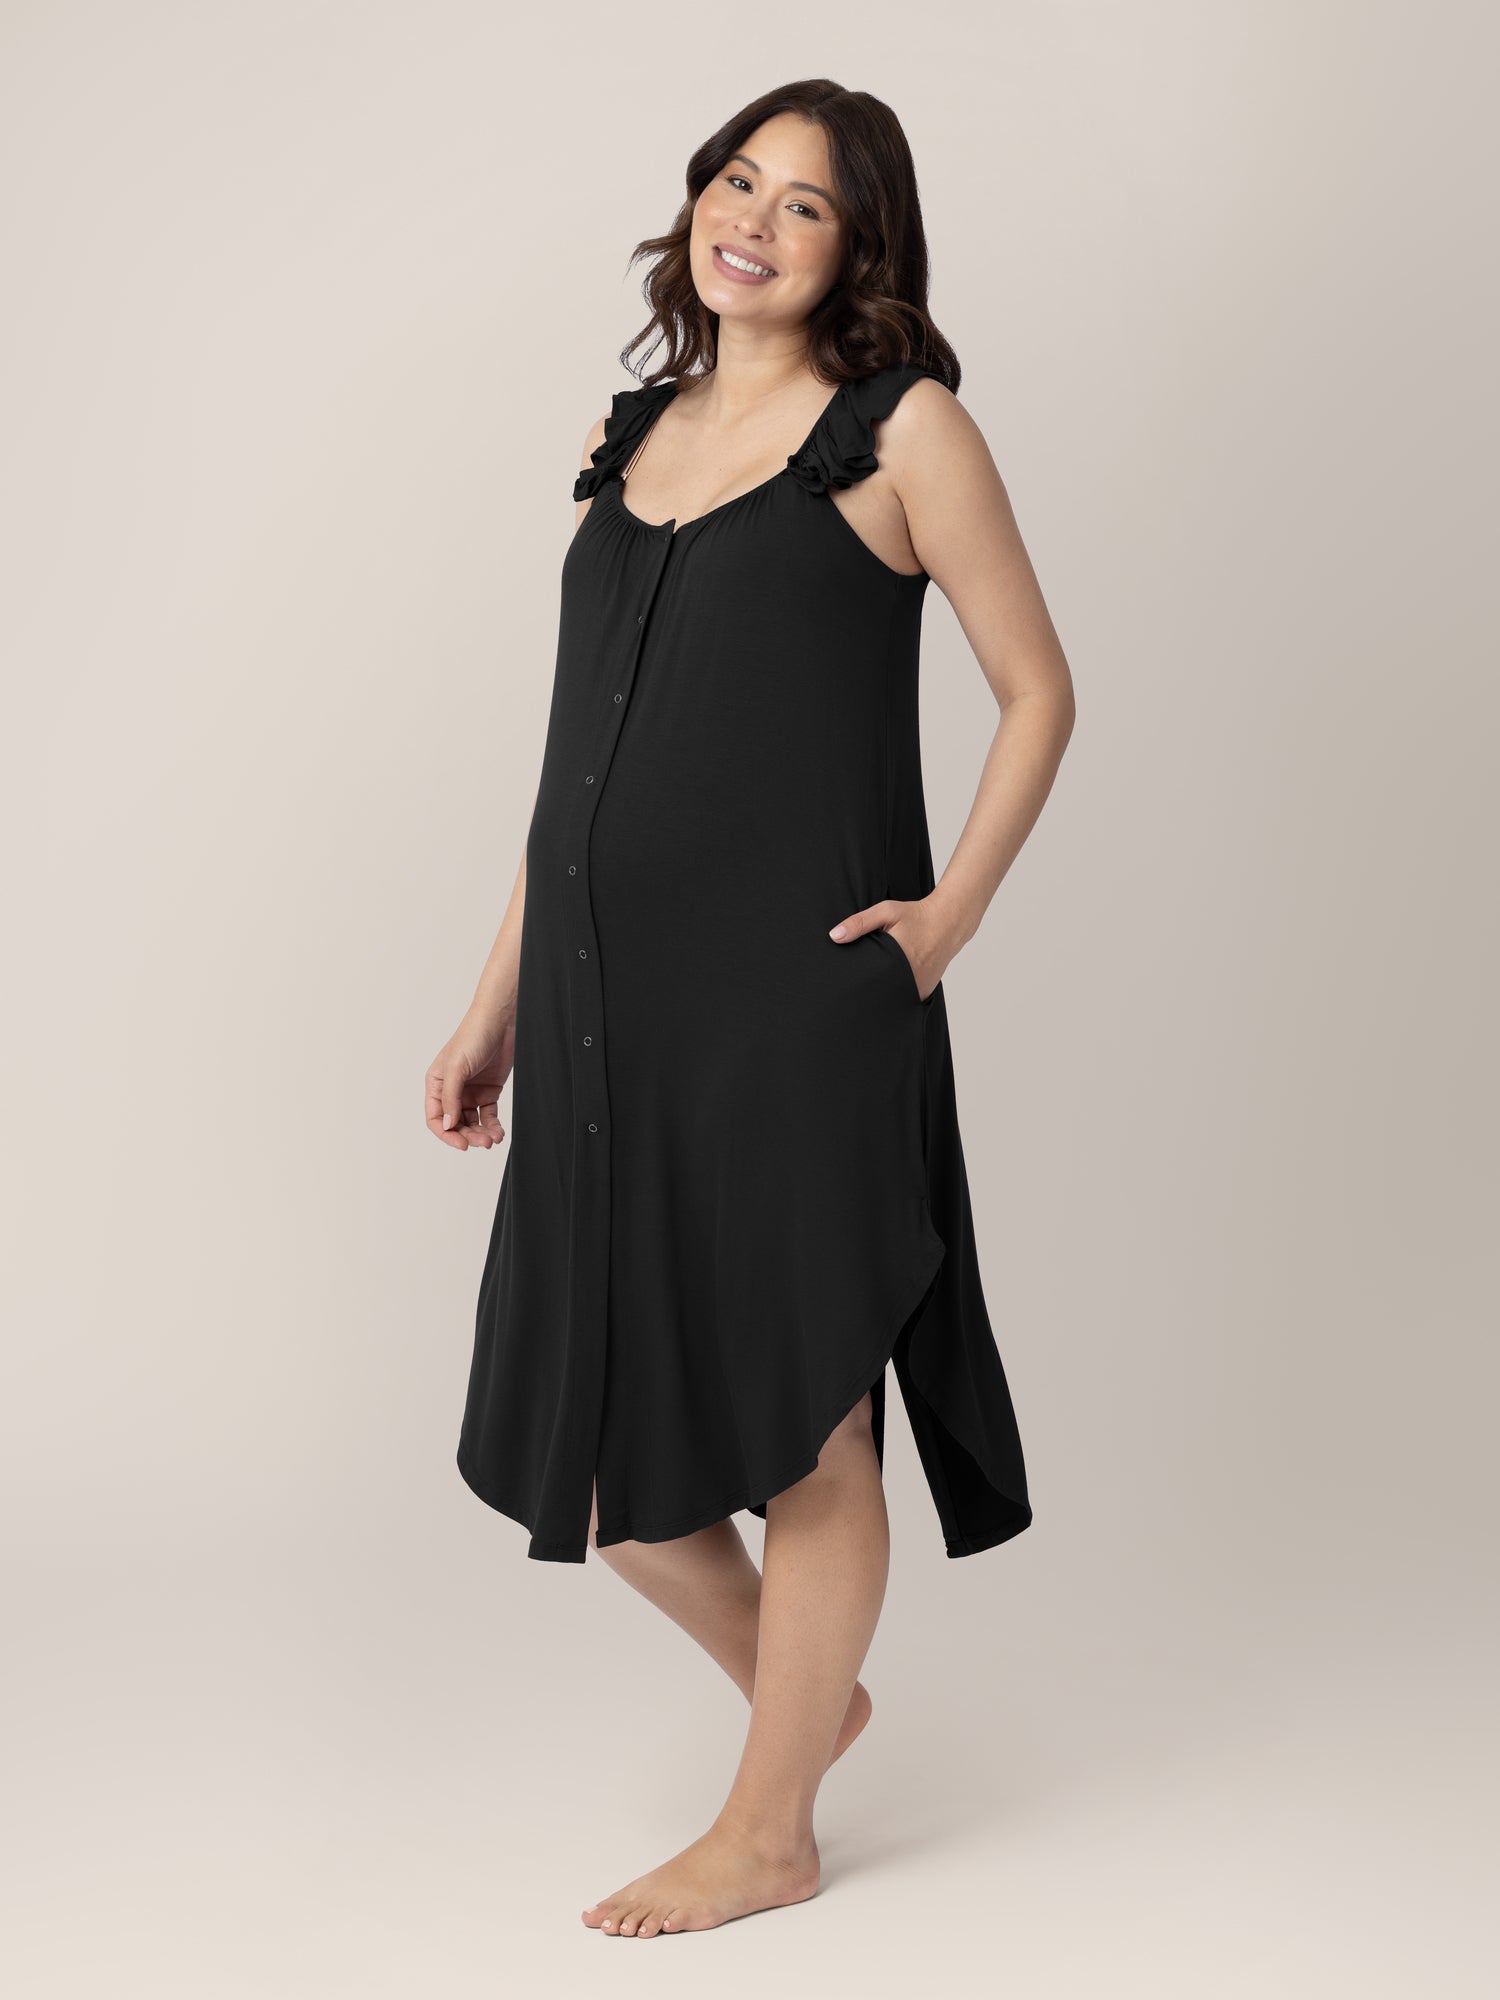 Kindred Bravely Universal Labour & Delivery Gown Size S/M/L